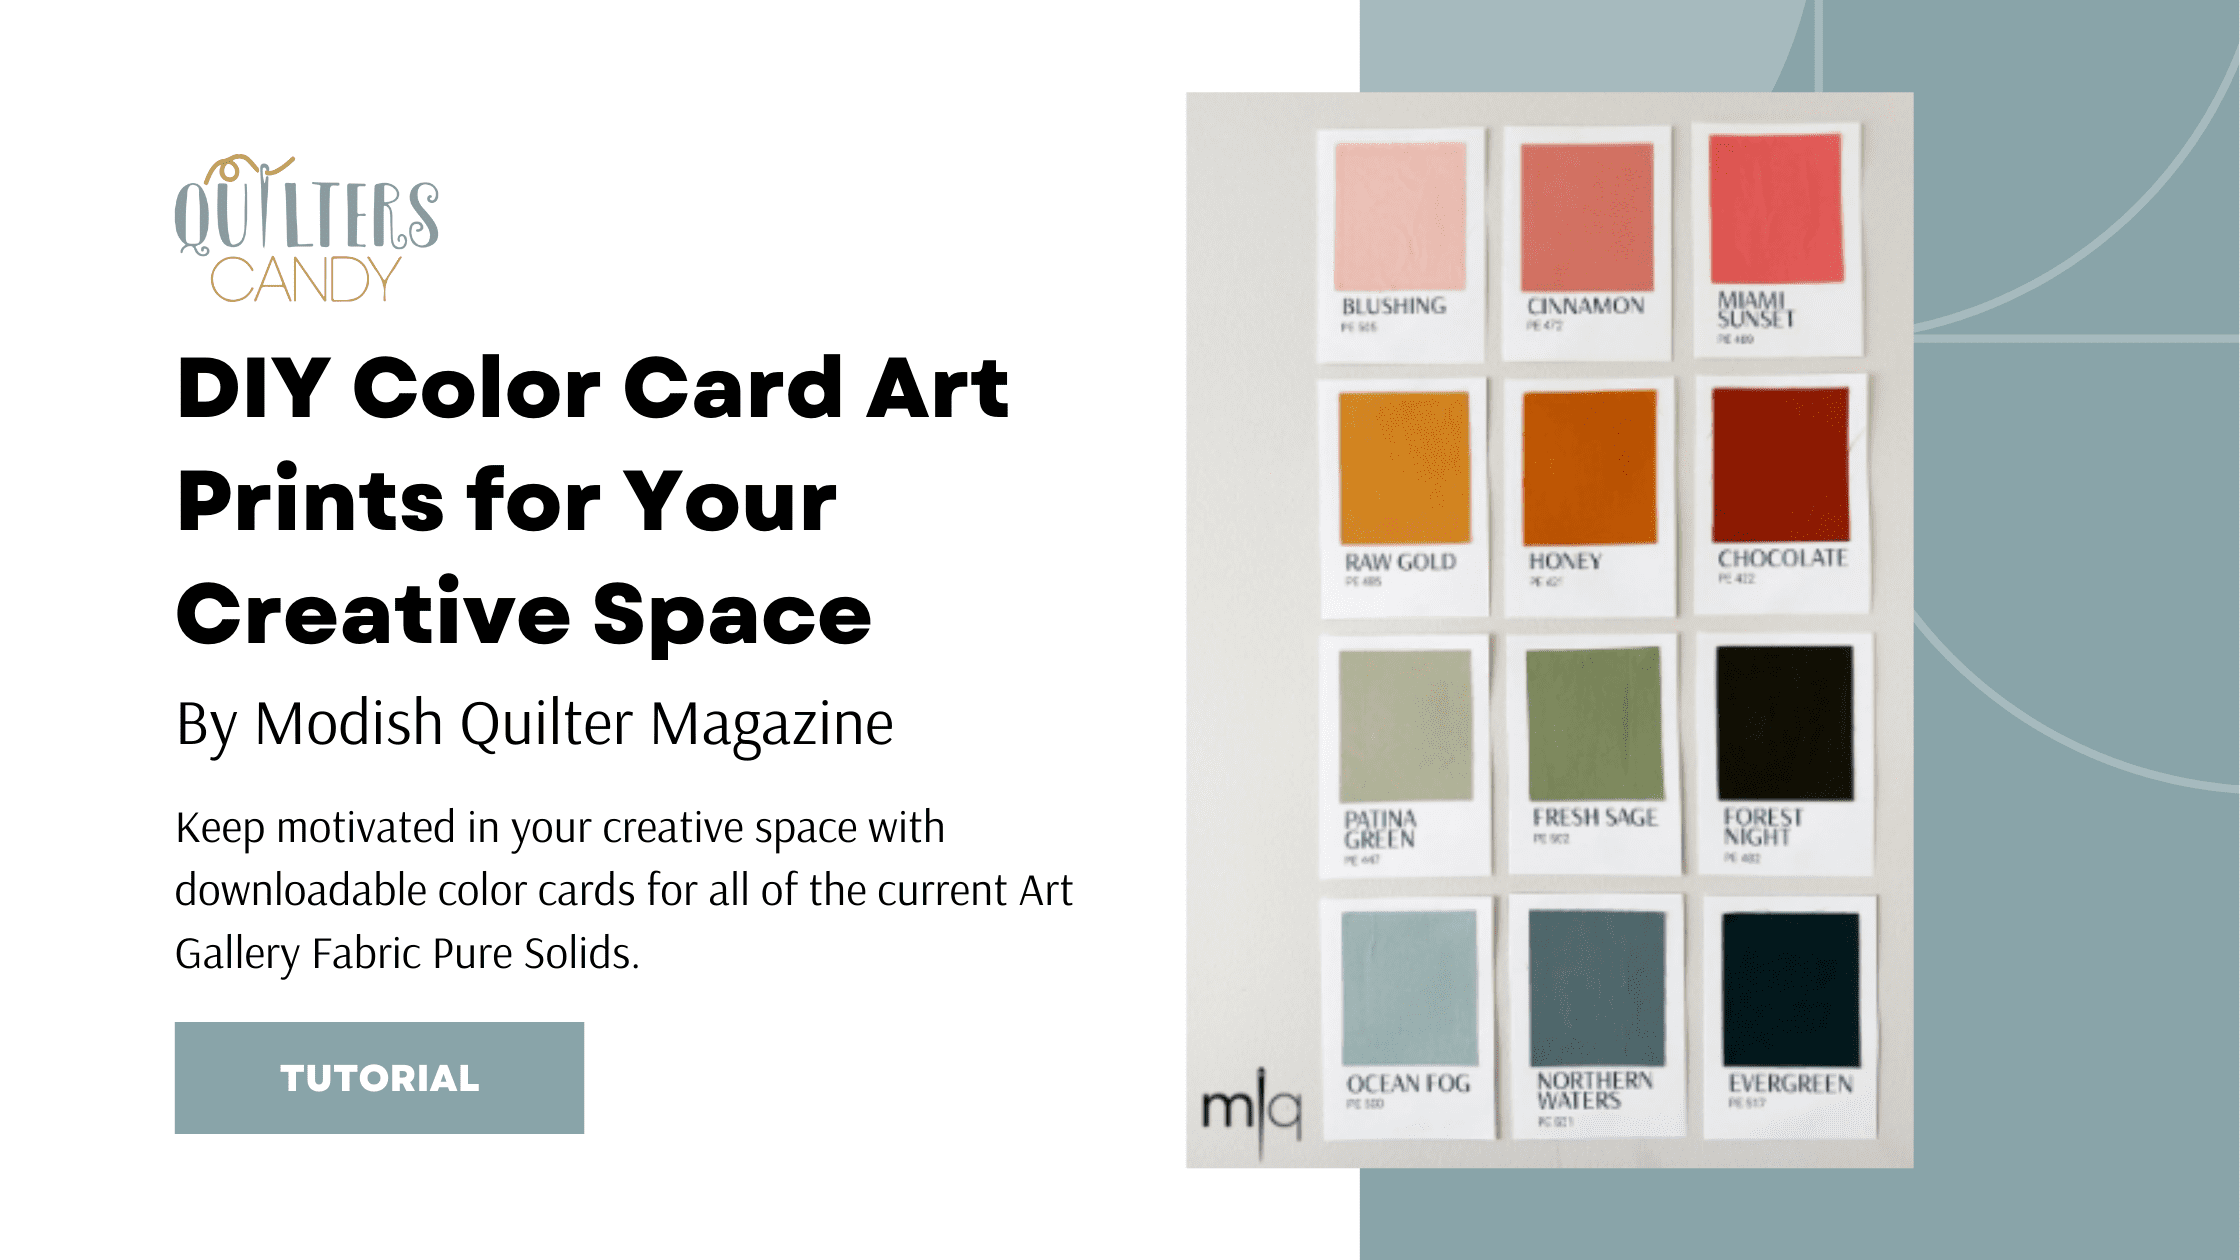 DIY Color Card Art Prints for Your Creative Space by Modish Quilter Magazine